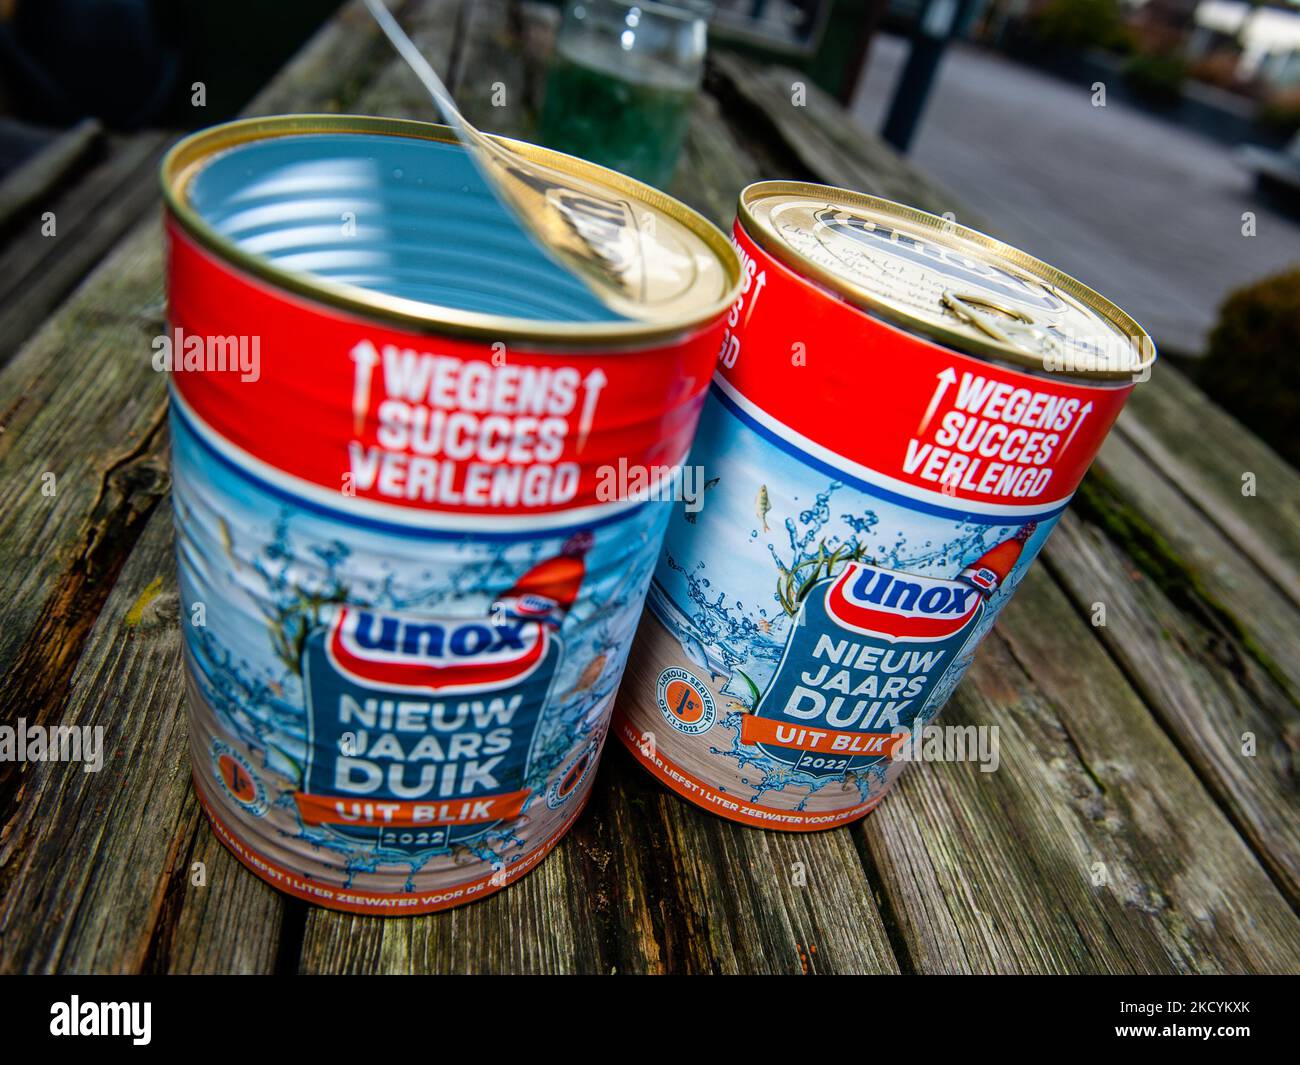 A view of the Unox cans filled with seawater to celebrate the traditional New Year's dive again at home because of the pandemic. In Nijmegen, on January 1st, 2021. (Photo by Romy Arroyo Fernandez/NurPhoto) Stock Photo